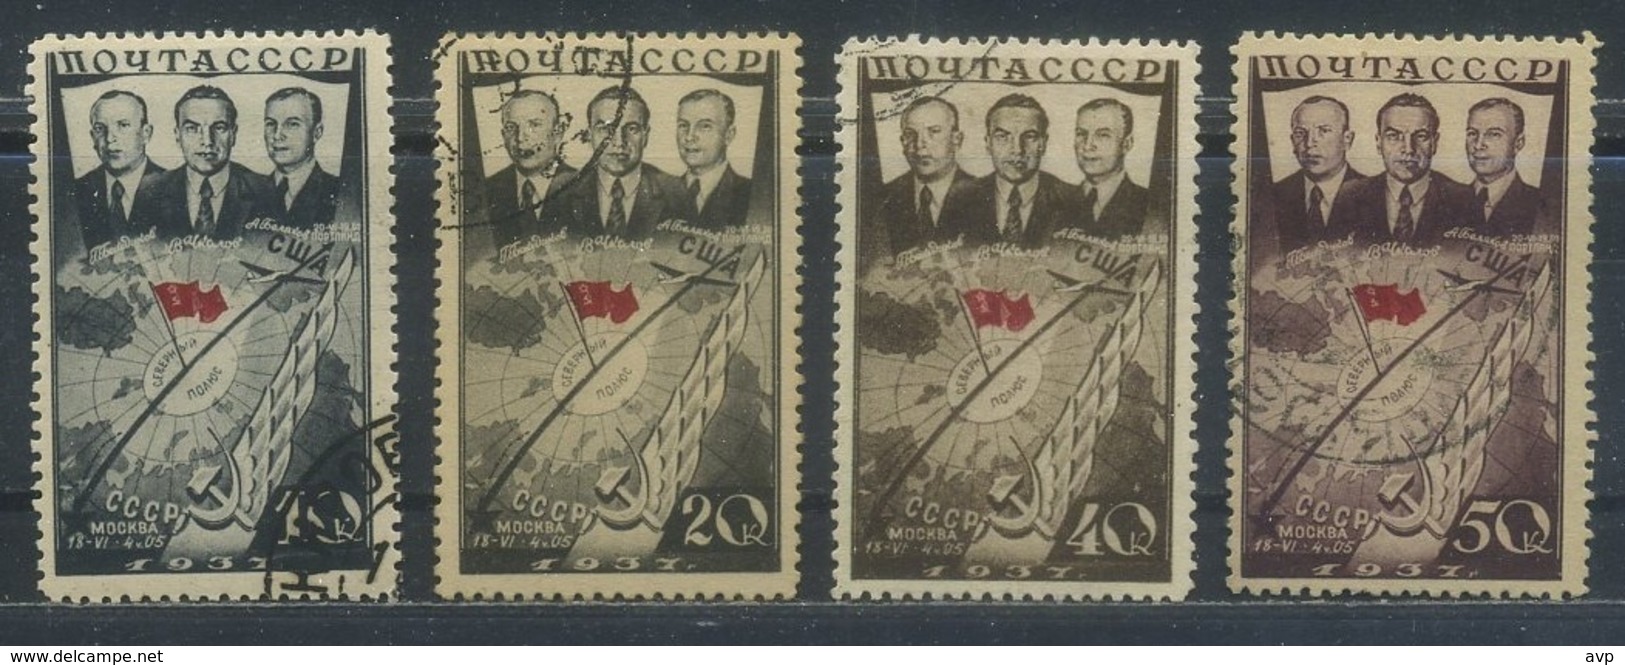 USSR 1938 Michel 595-598 First Flight Moscow-Portland Over North Pole. Used - Oblitérés